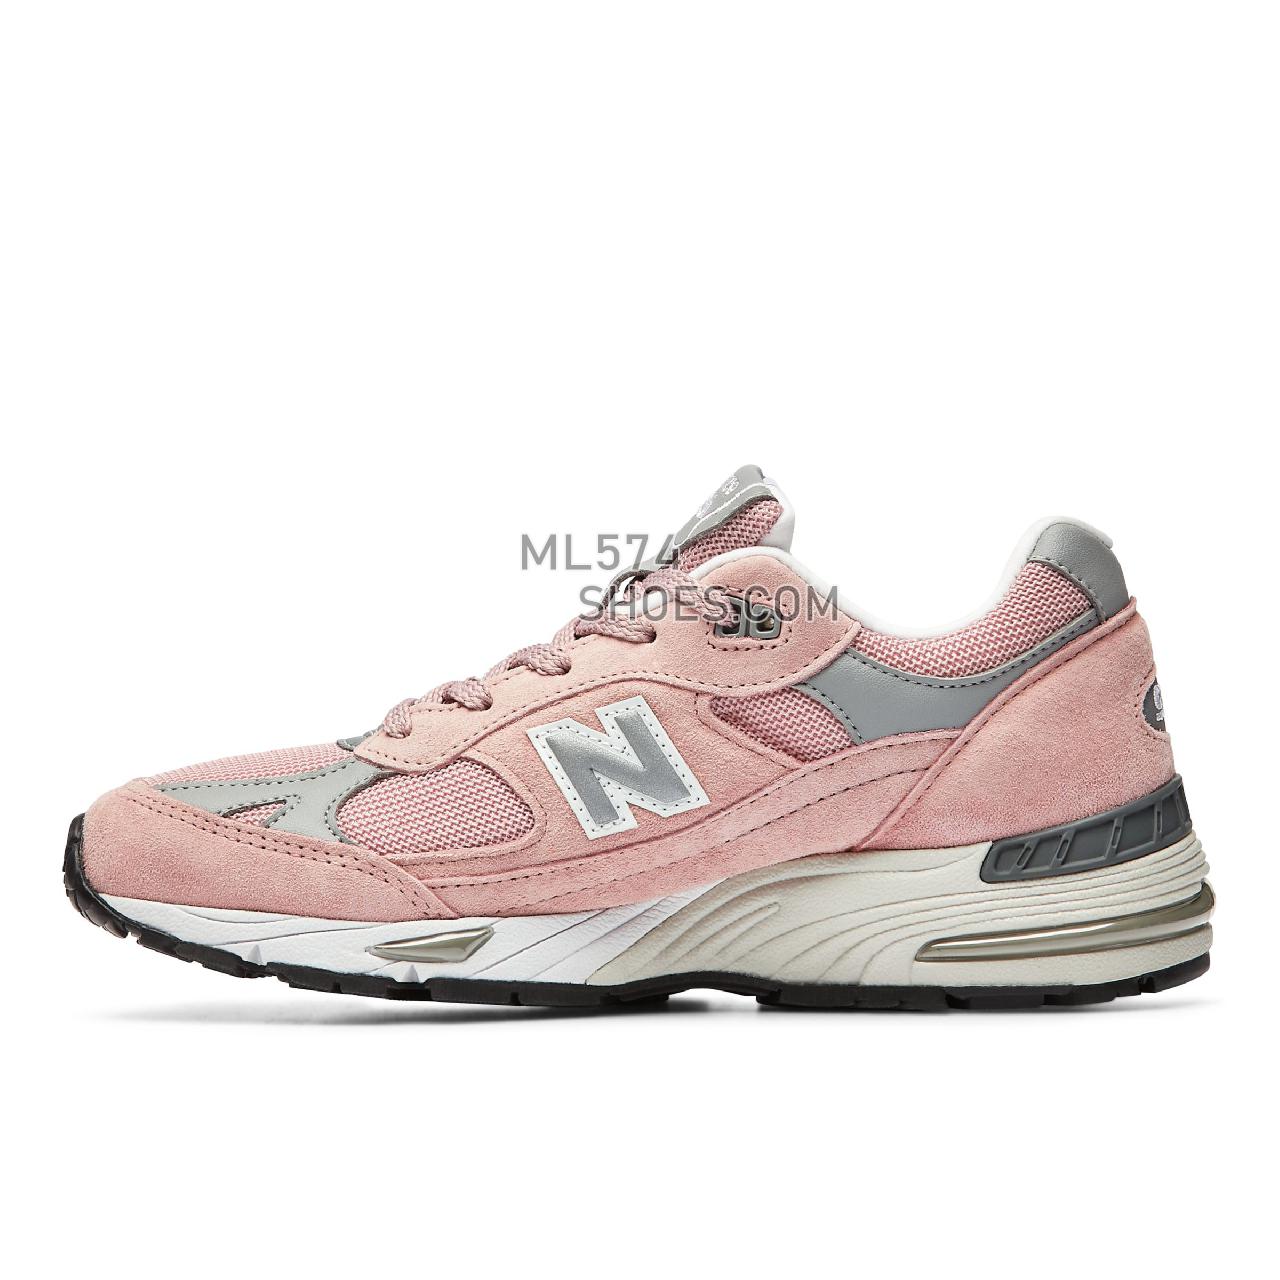 New Balance Made in UK 991 - Women's Made in USA And UK Sneakers - Pink with Grey and White - W991PNK